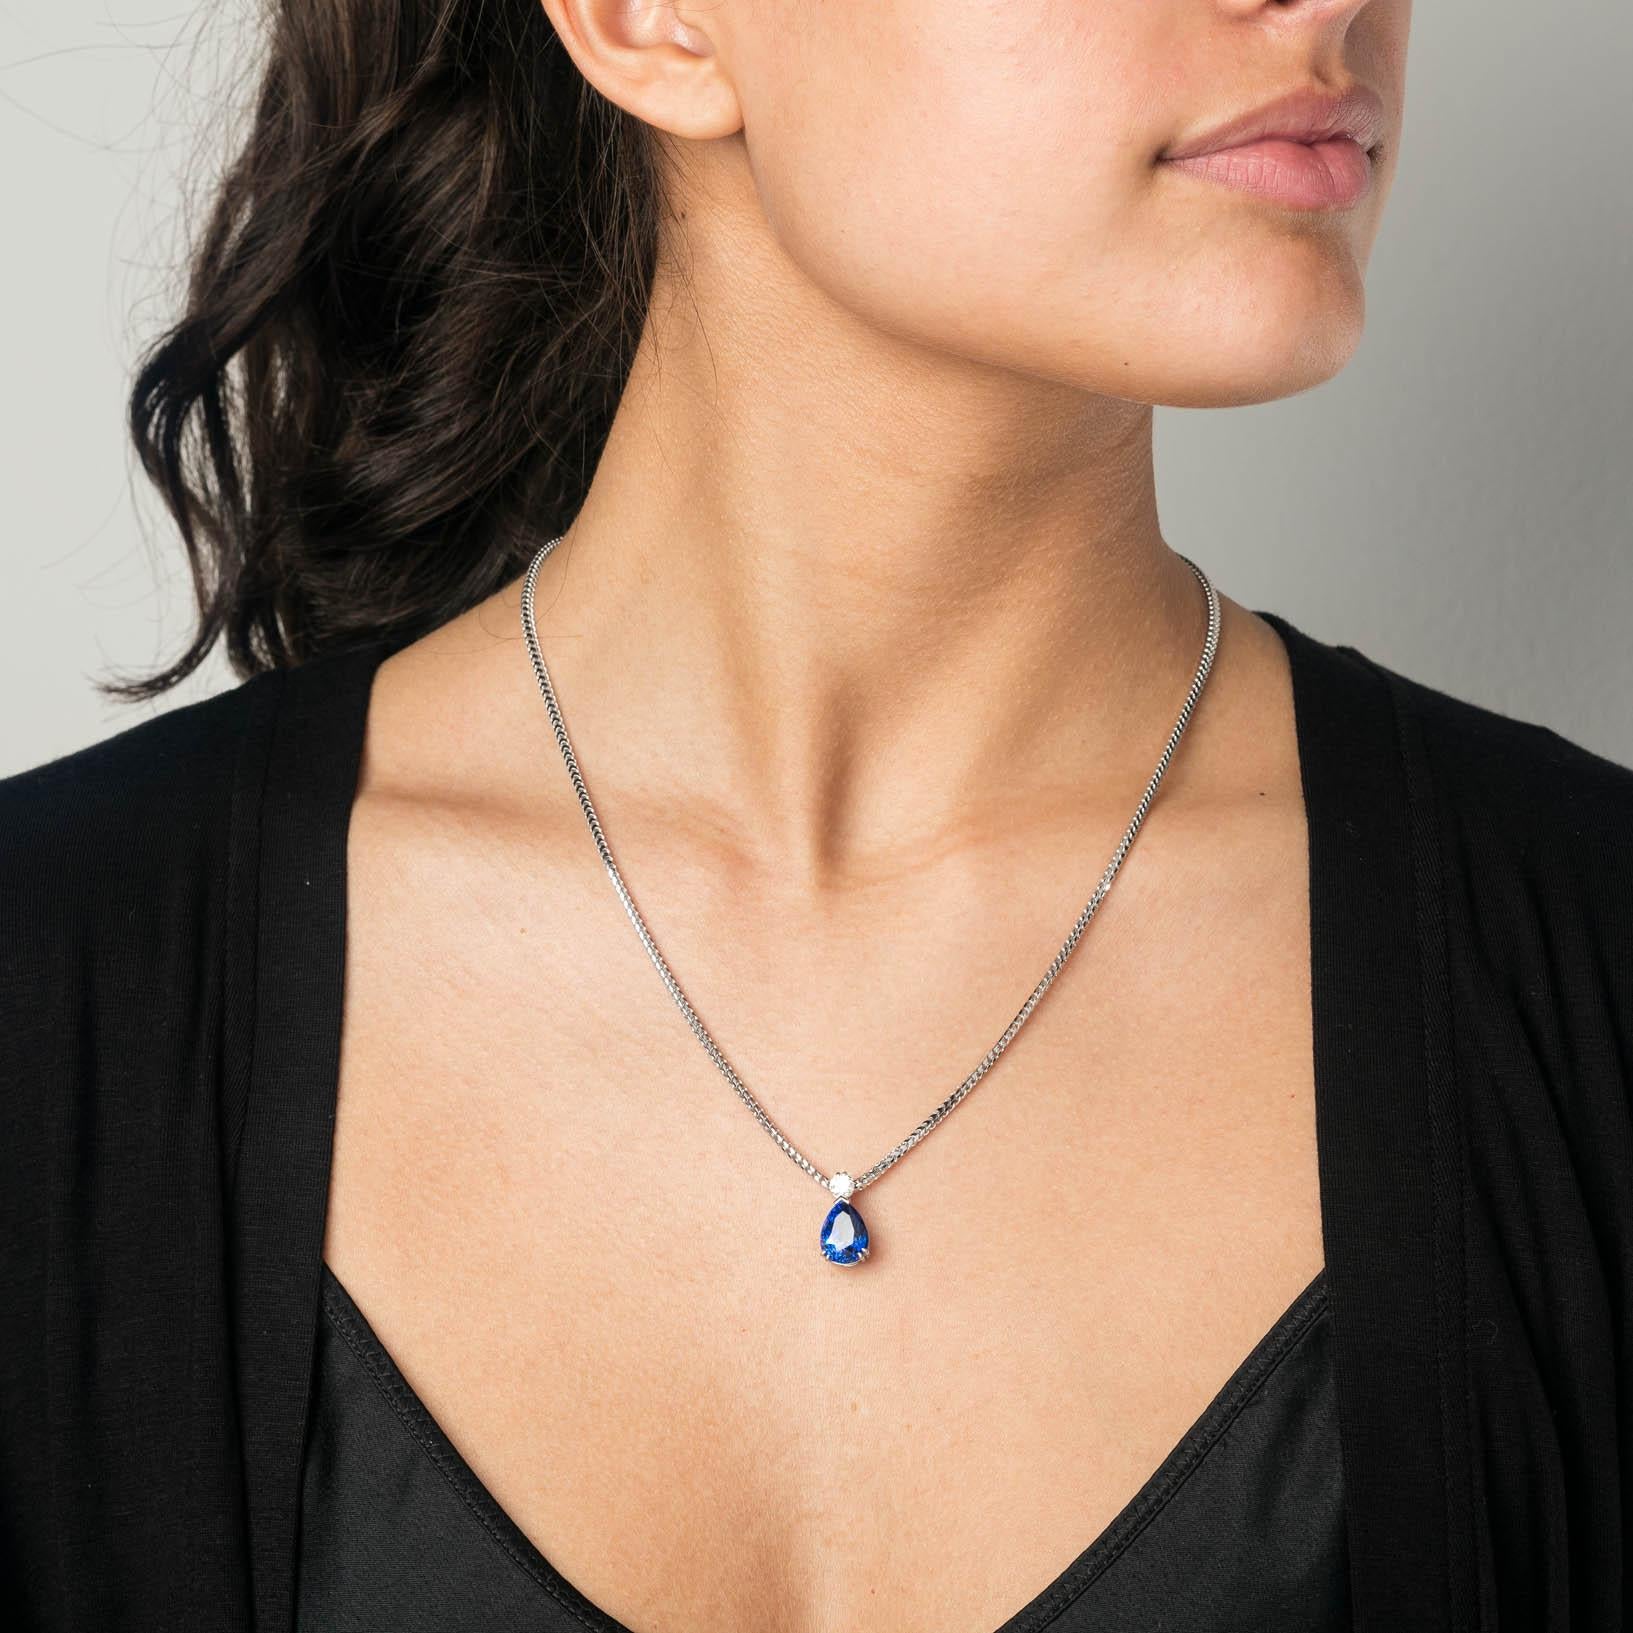 This is a 18 Carat white gold pendant, set with an impressive 6,59 Carat pear-cut Ceylon Sapphire. On top of the sapphire is a 0,36 ct. Brilliant-cut Diamond.
Cober designs exclusive wedding rings, jewels and watches, all of them made by hand.
“The